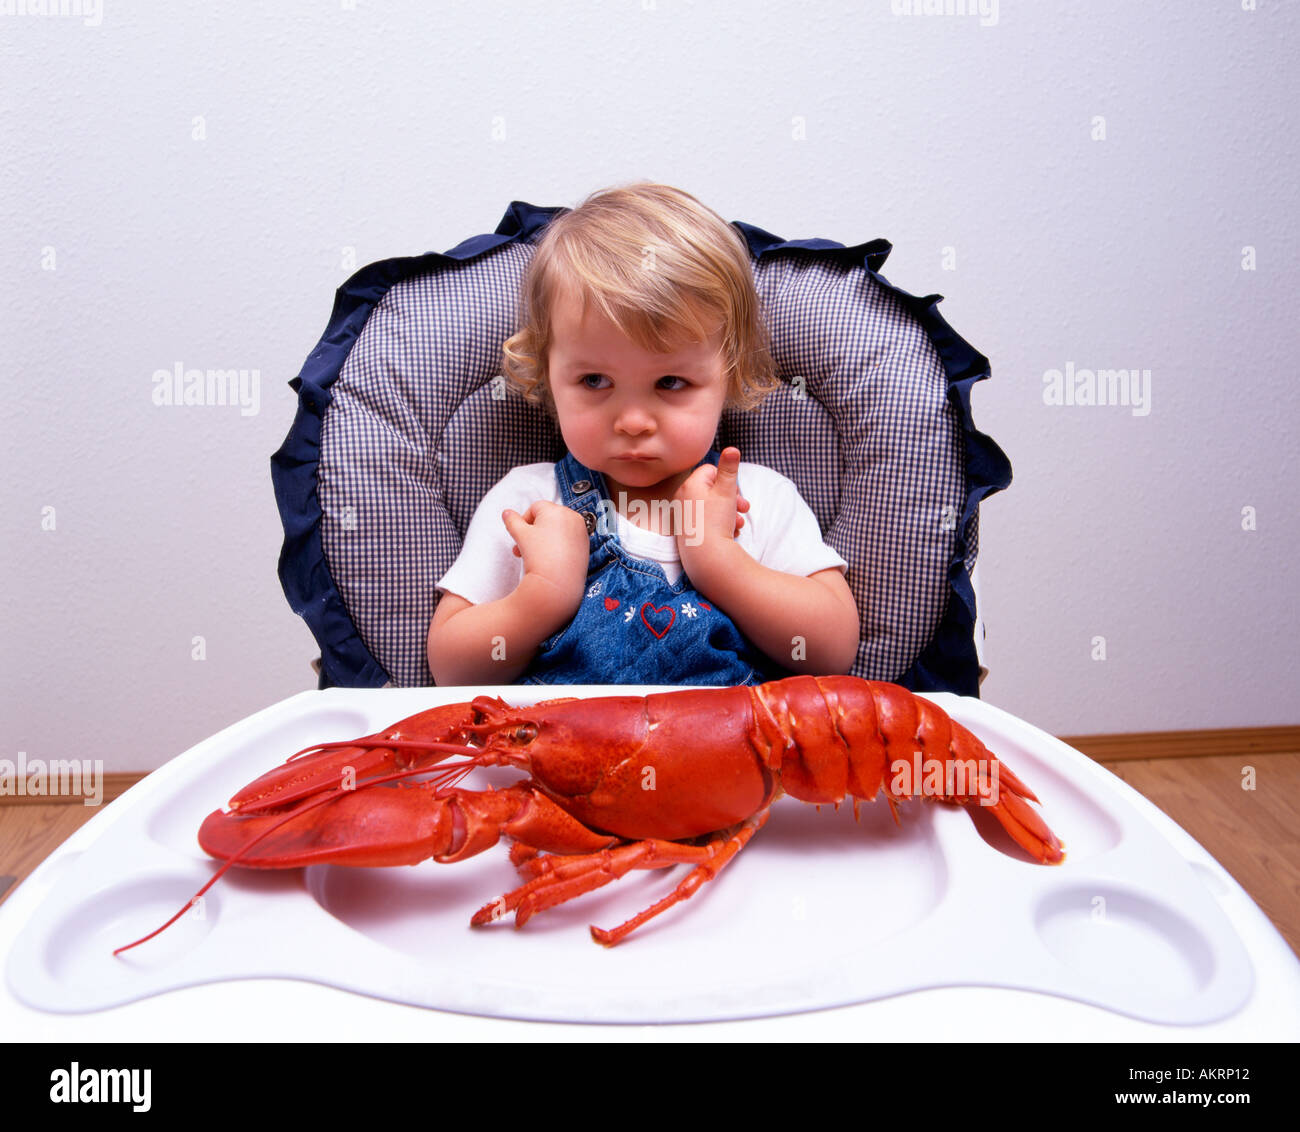 Toddler Sitting In Highchair With Lobster On Tray Stock Photo